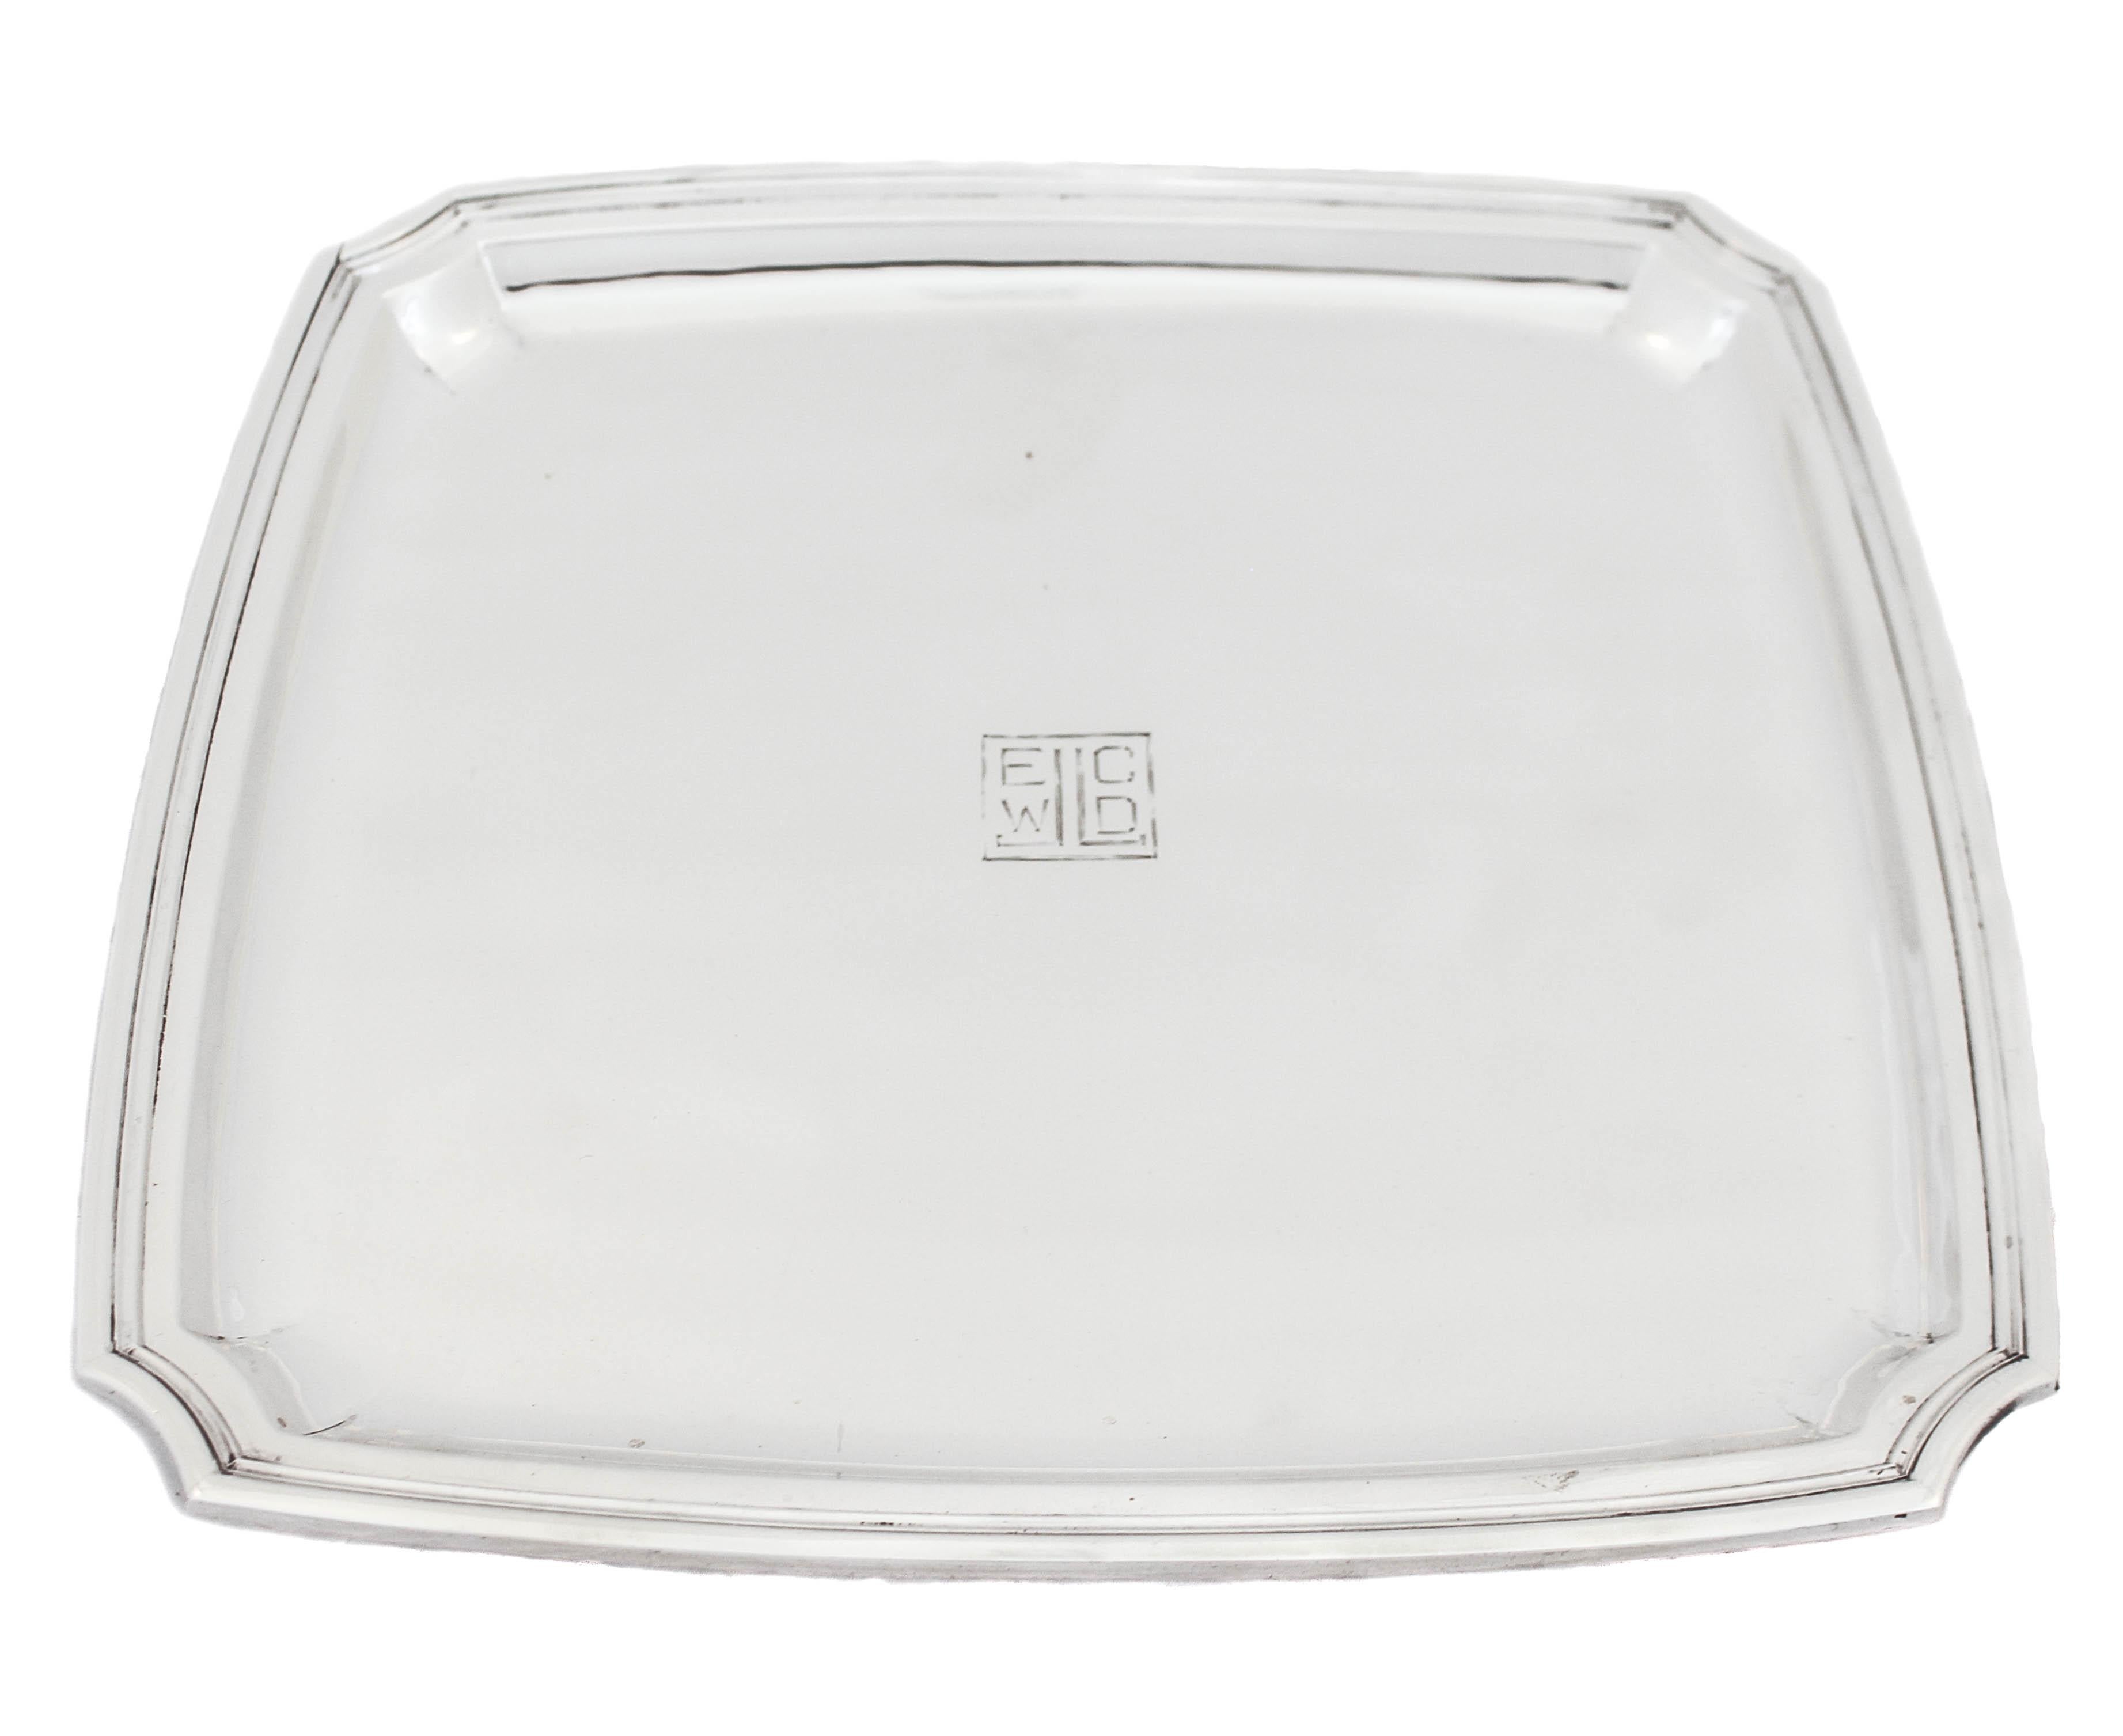 Being offered is a sterling silver tray by the world famous Cartier. It’s Mid-Century classic shape and style is sophisticated and elegant. The corners are scalloped and there is are ridges along the rim. In the center a hand engraved monogram